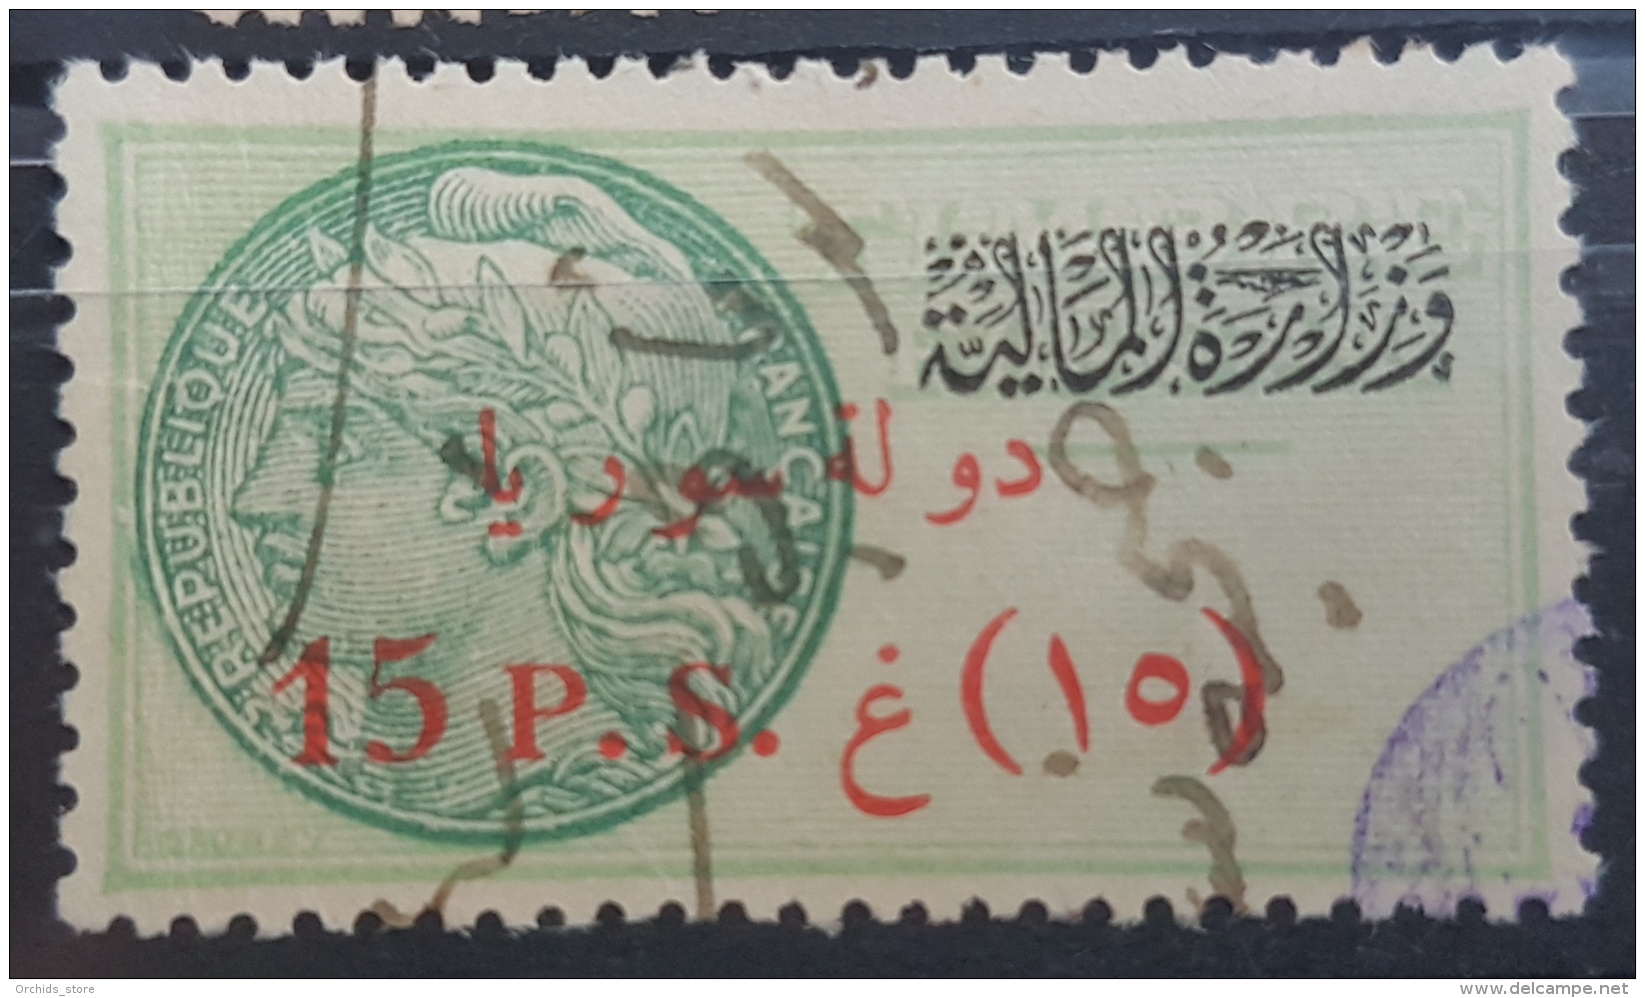 BB2 #63E - Syria 1932 Fiscal Revenue Stamp 15p (Vermilion Ovpt) With Black Rectangle Ministry Of Finance Control Ovpt - Syrien